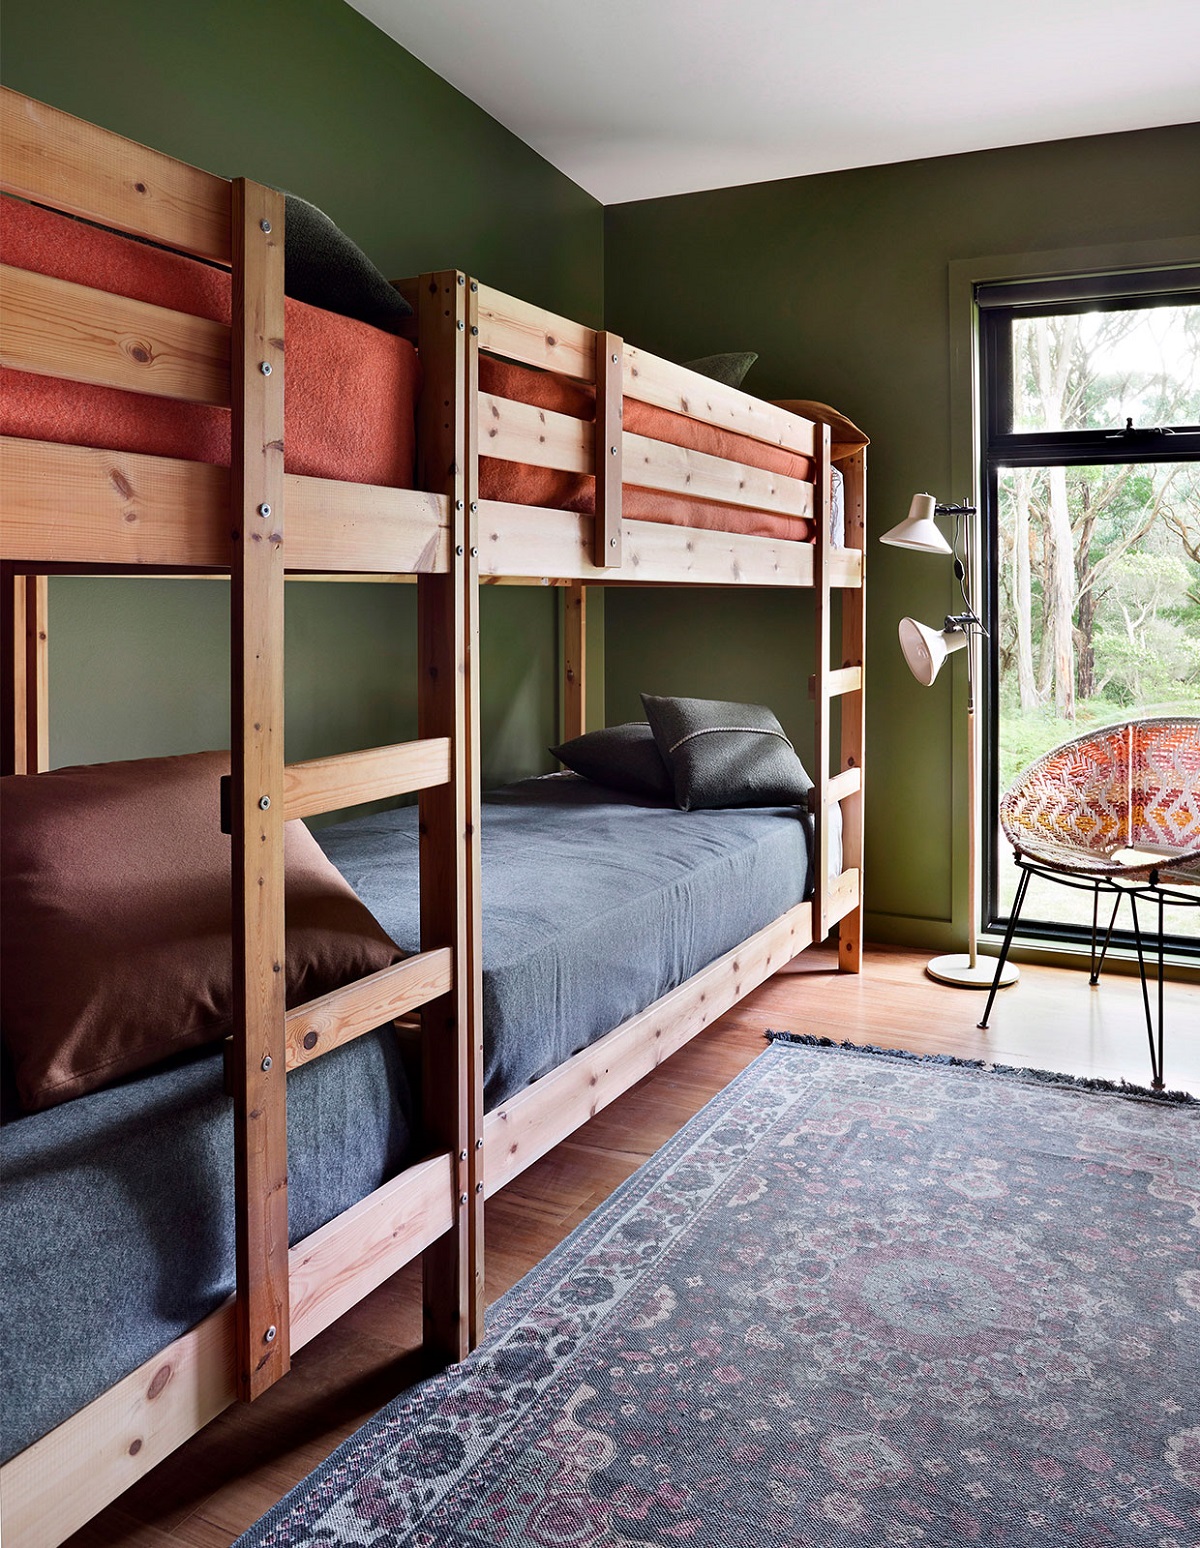 Busy Melburnians Simone and David Kelly craved a place to escape to regularly. The bush-inspired weekender features bunk beds in a more sophisticated style that is perfect for accommodating children and adults.